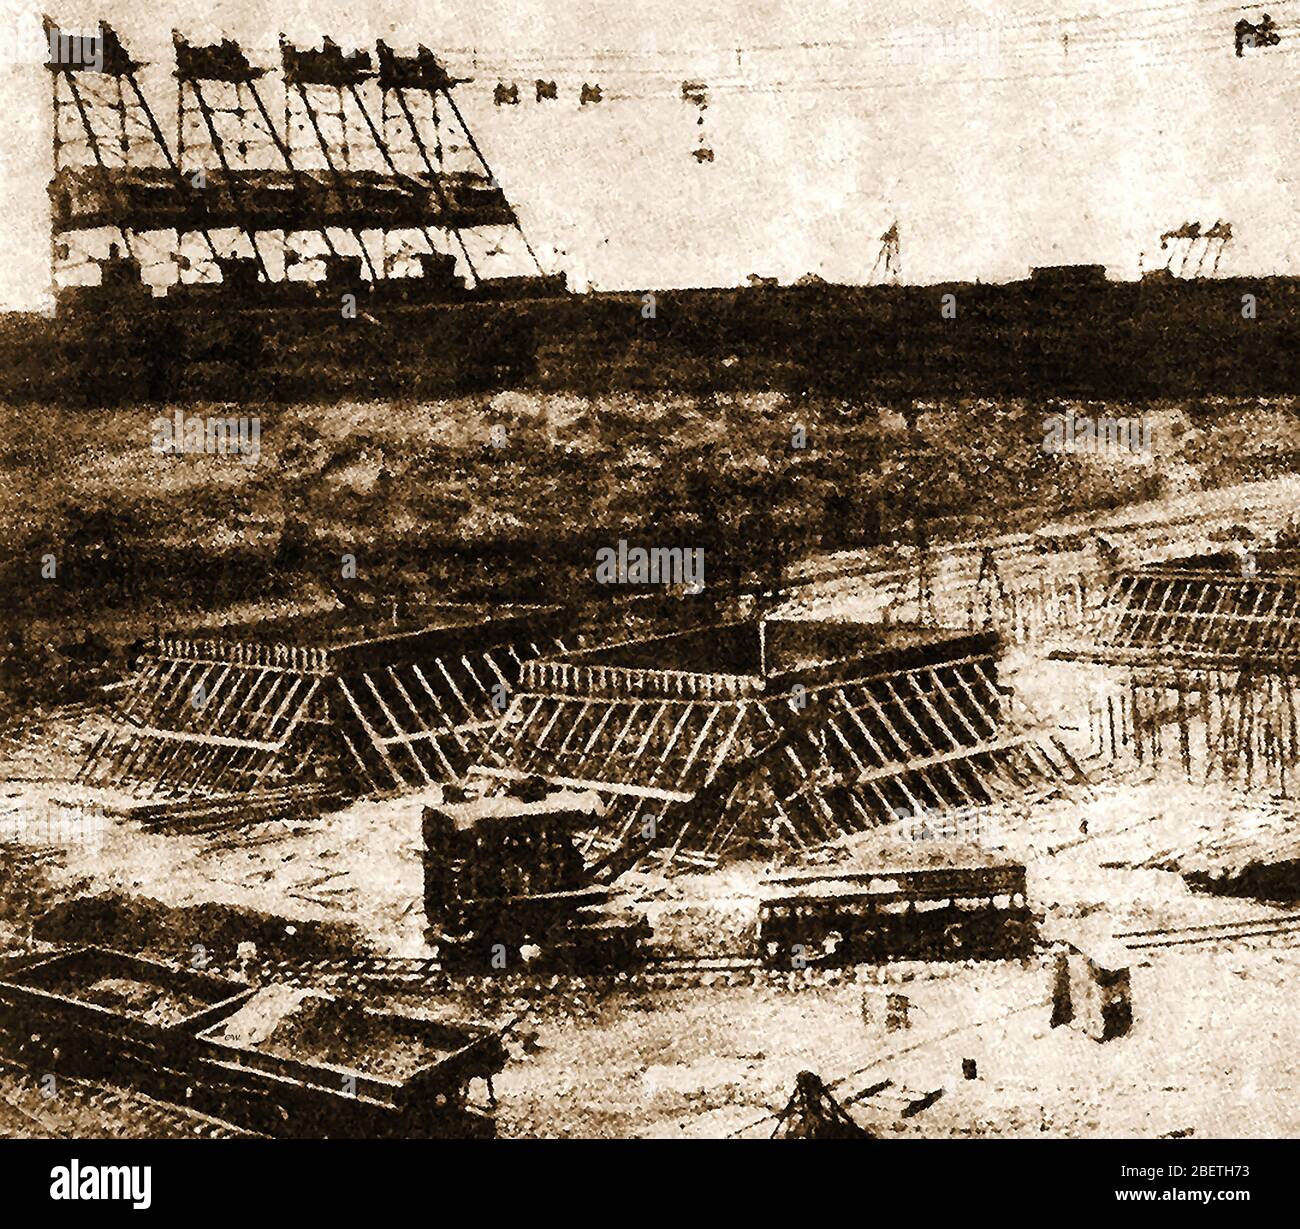 An early printed photograph showing the building of the Panama Canal  - Transporting large amounts of concrete to the site. Stock Photo